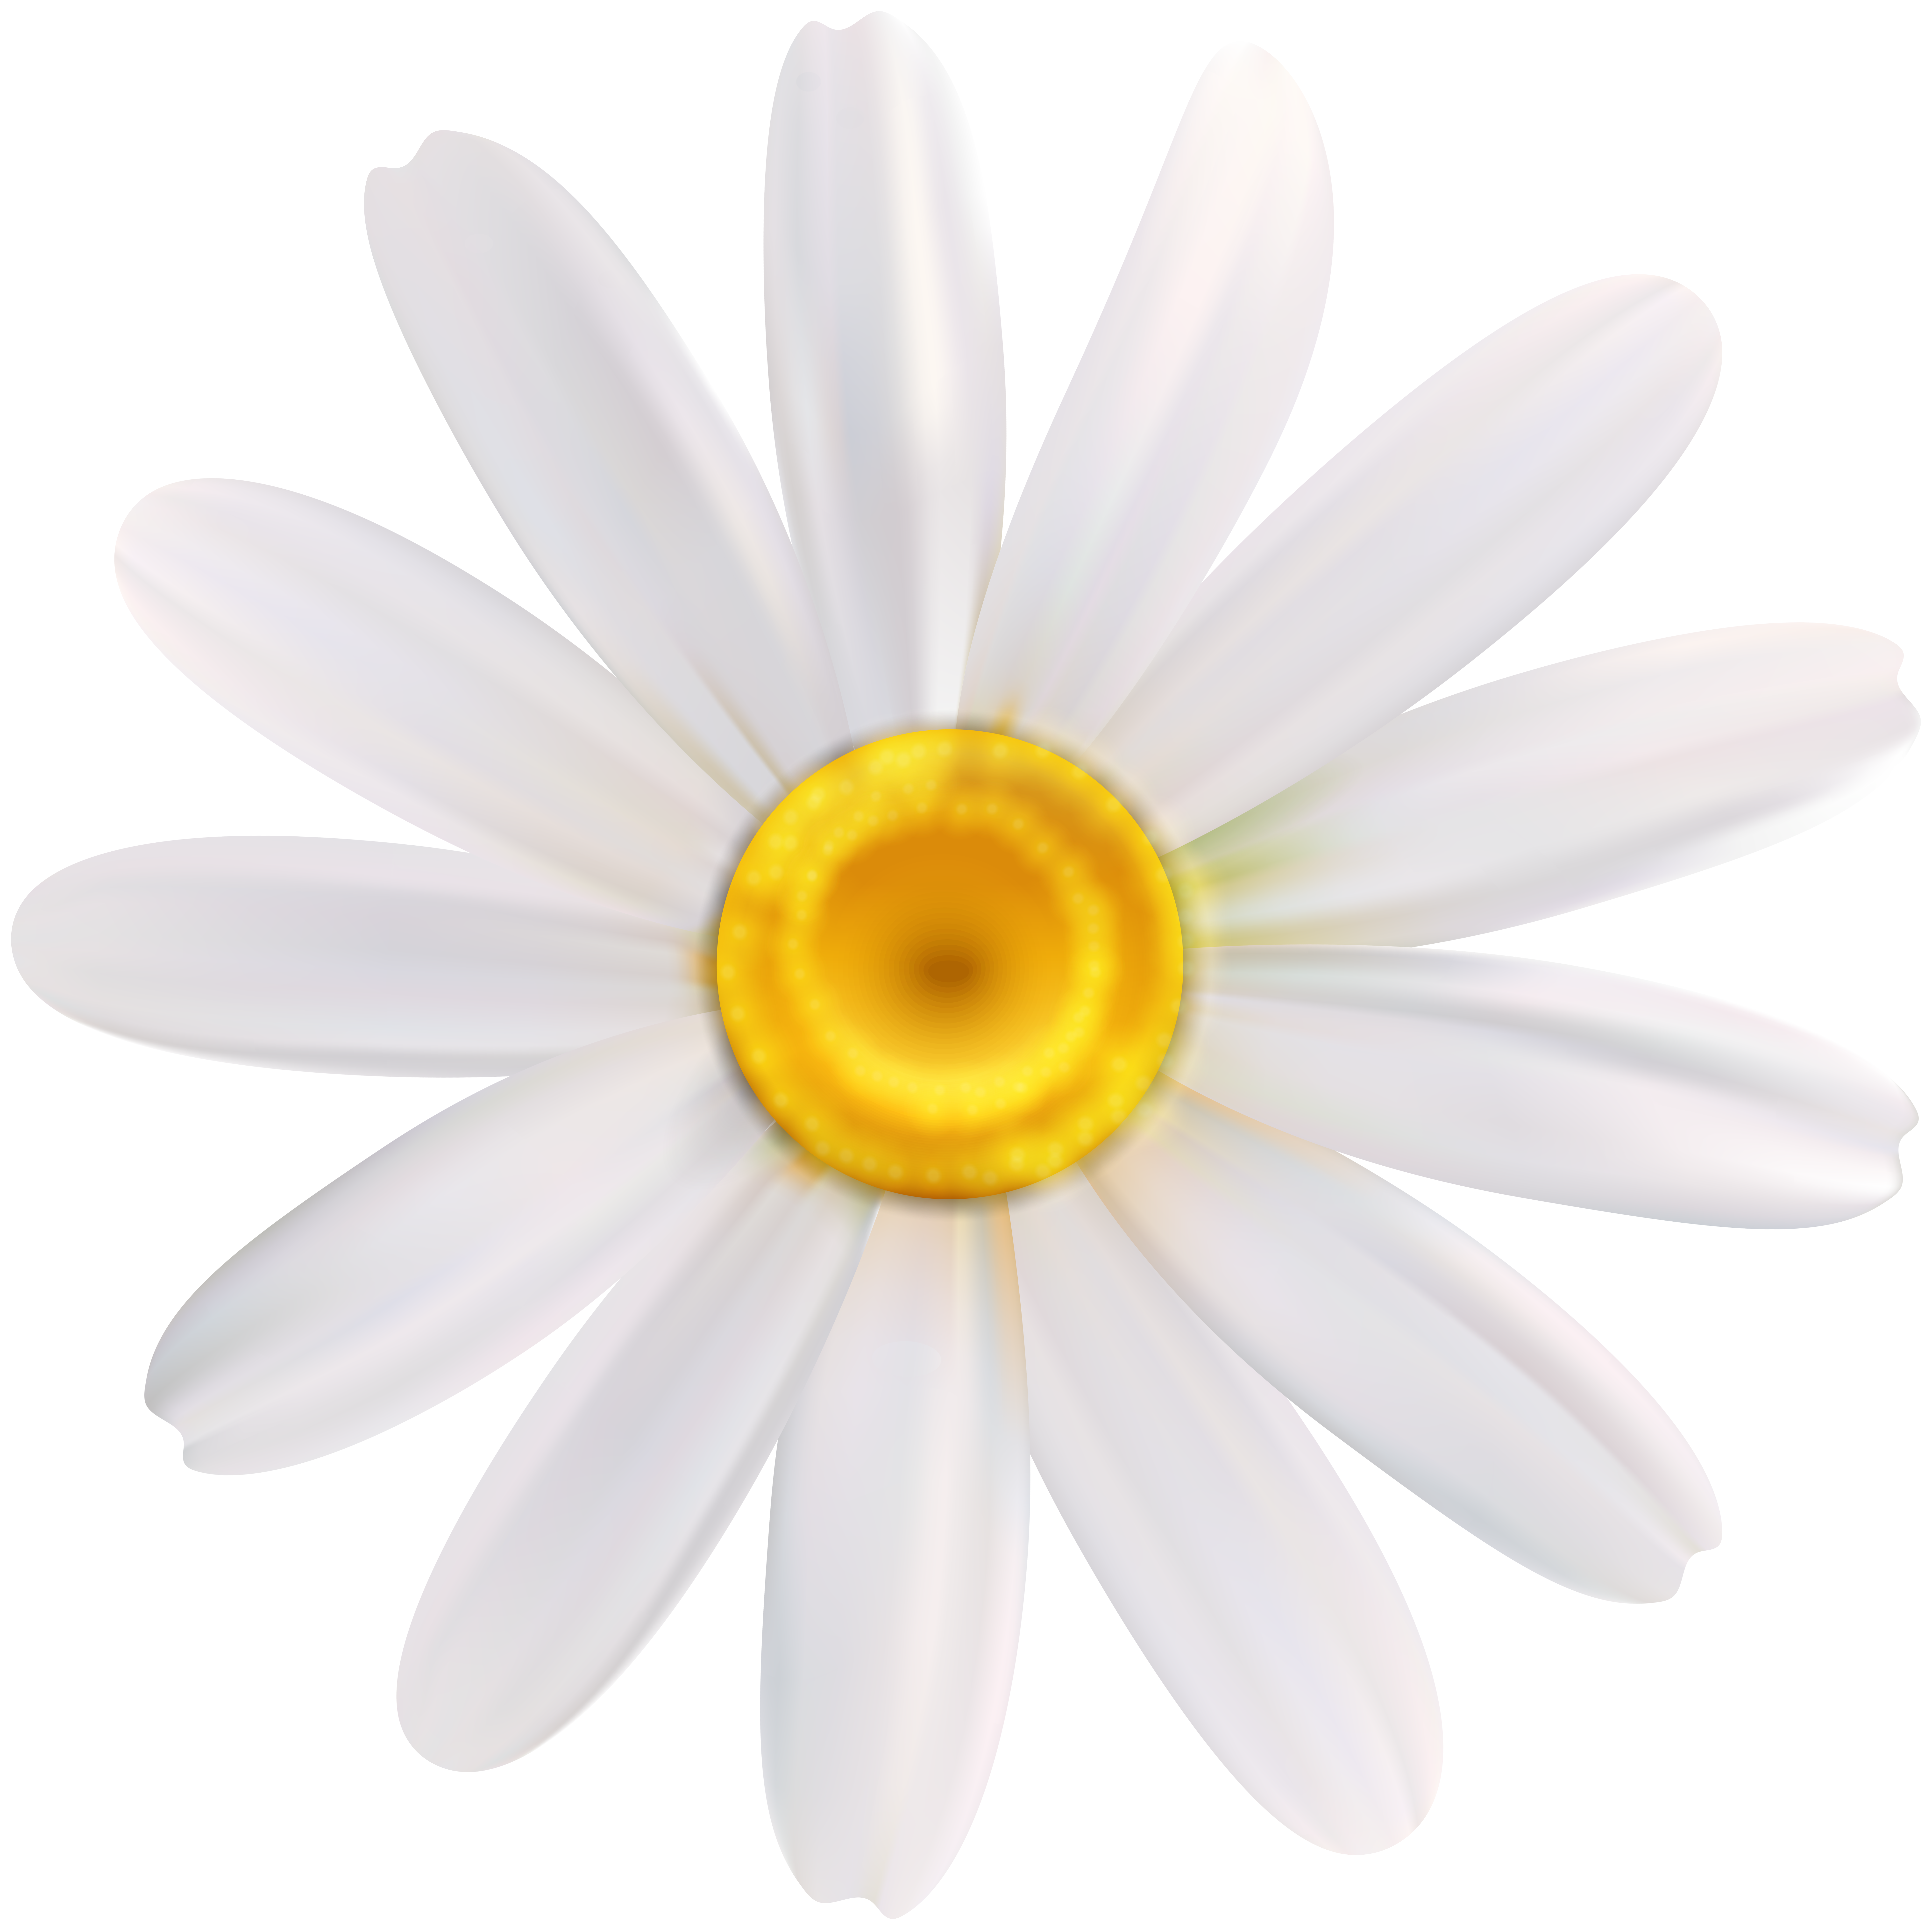 Daisy White Flower PNG Clipart​ | Gallery Yopriceville - High-Quality Free  Images and Transparent PNG Clipart